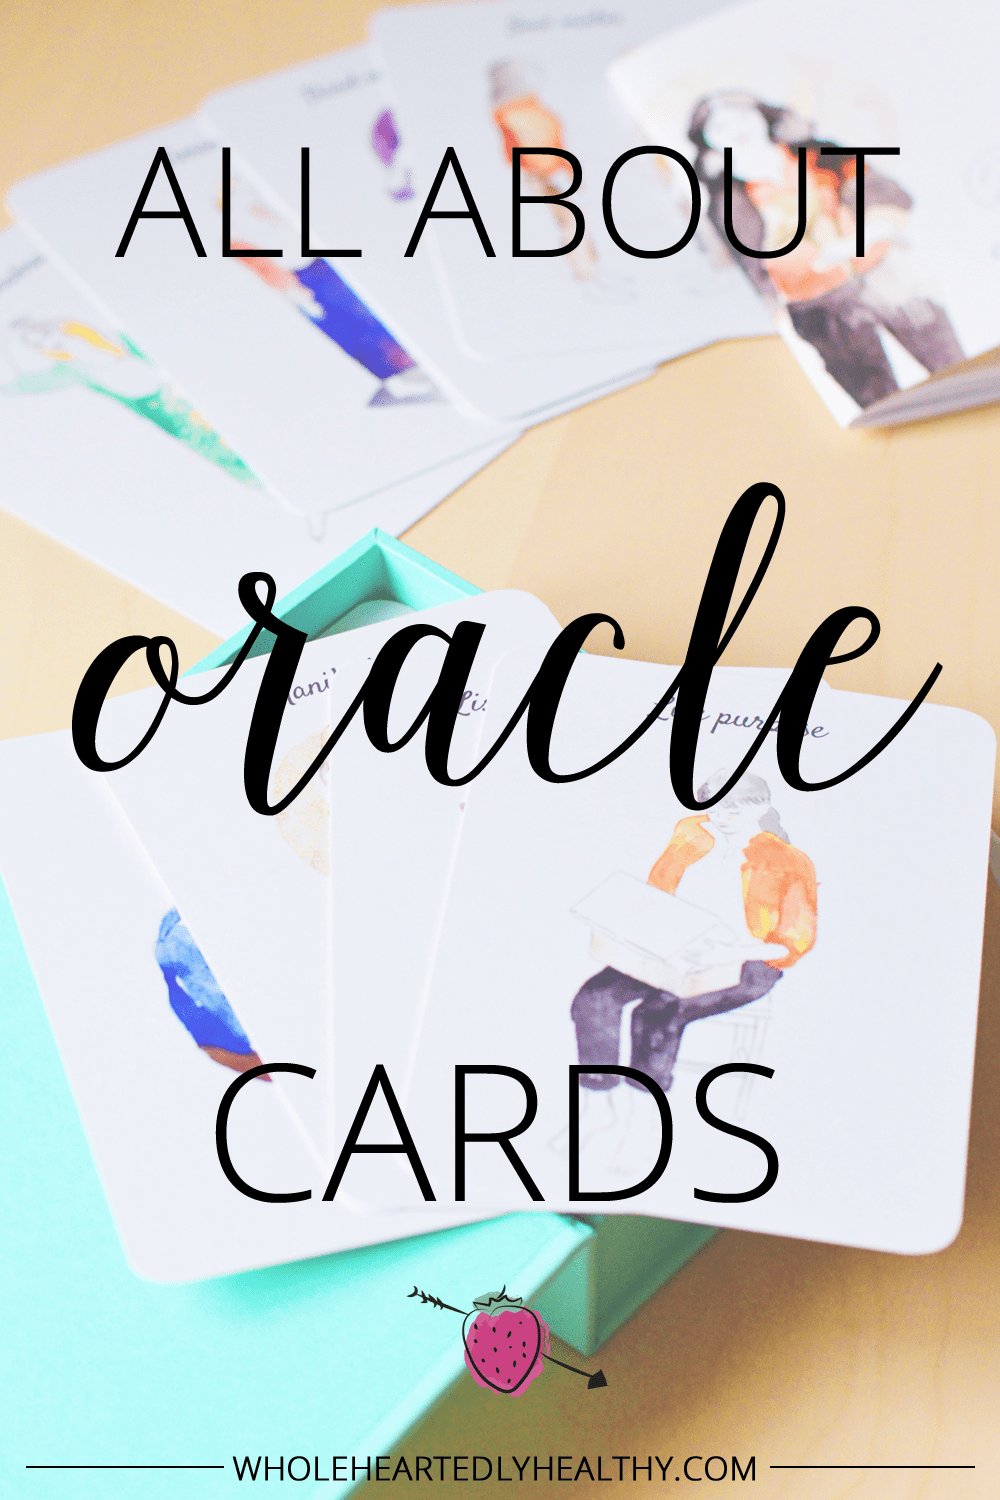 All about oracle cards